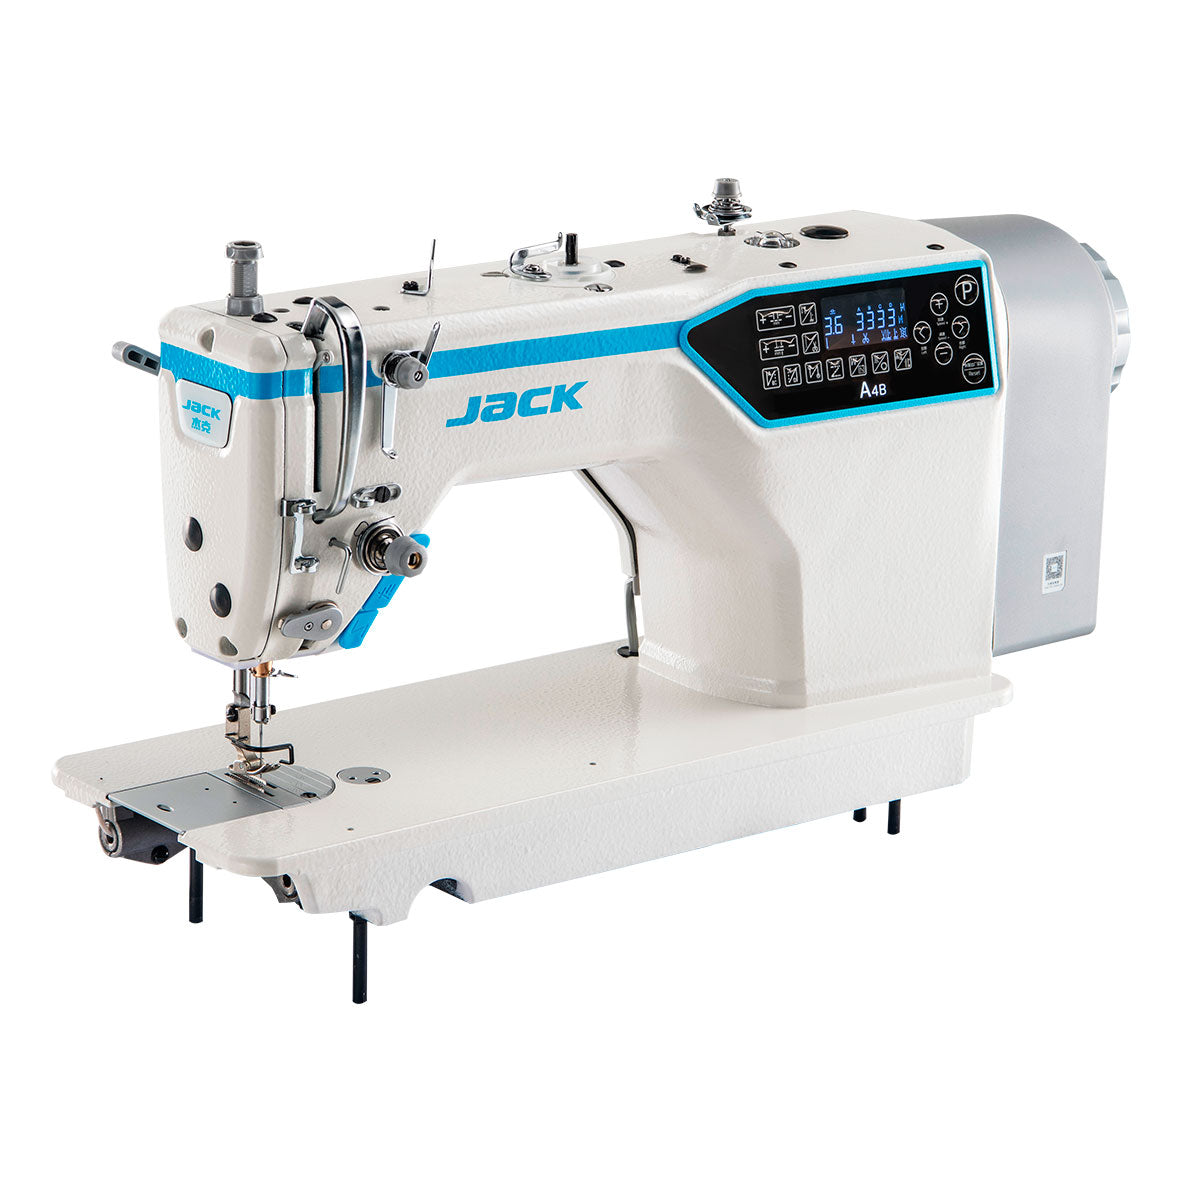 JACK A4 BC Single Needle Direct Drive Fully Automatic Drop Feed Lockstitch Industrial Sewing Assembled with Table and Stand Included